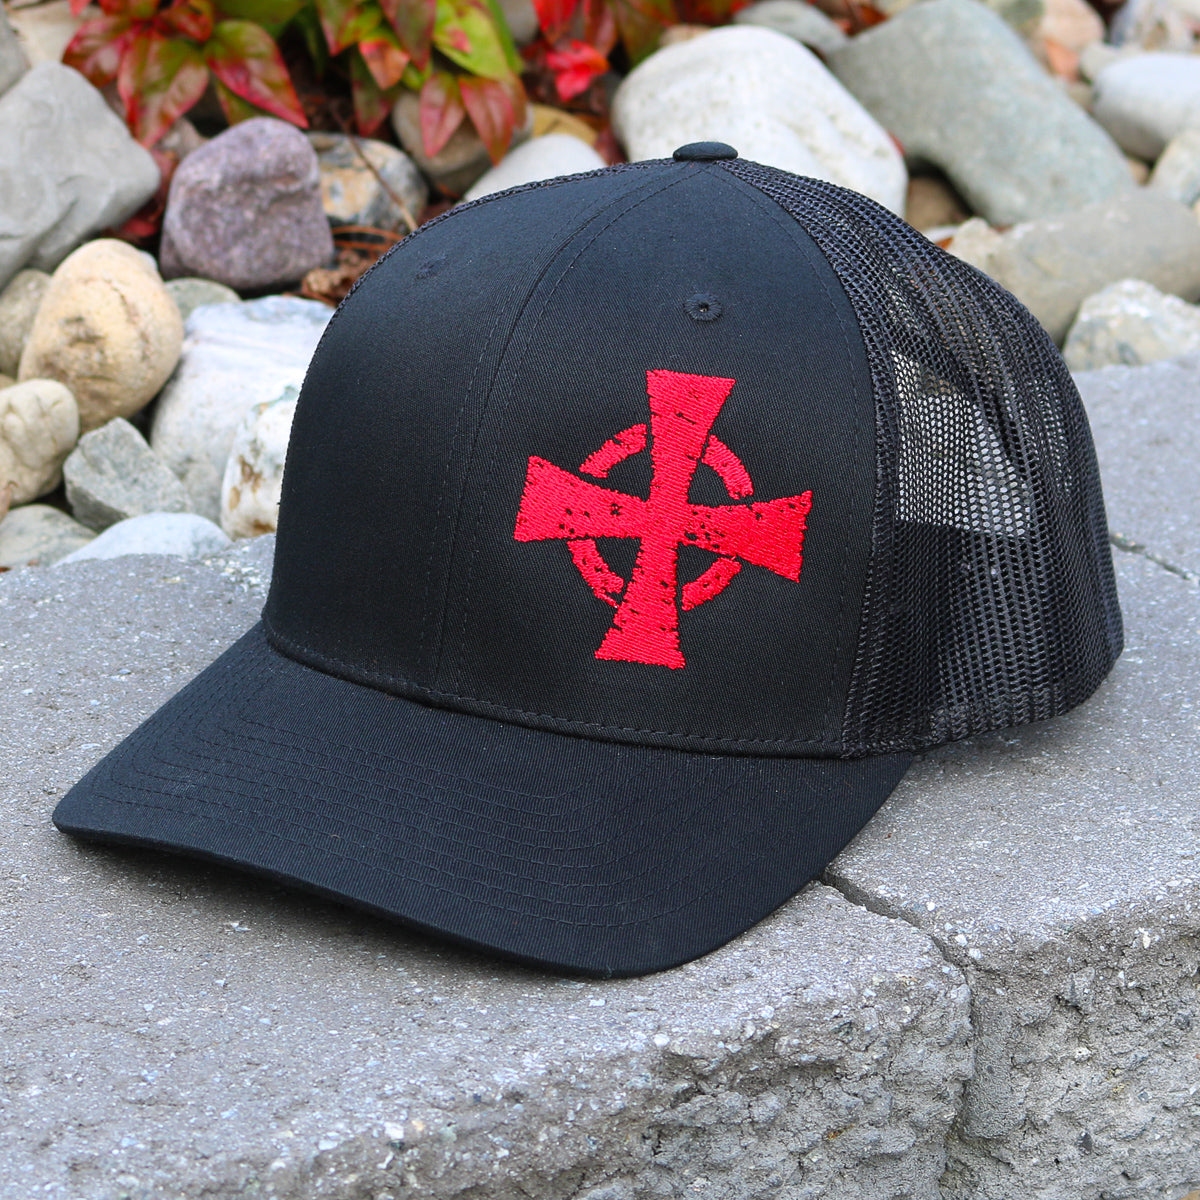 A Crusader hat features the Warrior 12 crusader cross embroidered on black a Richardson mesh snapback hat.